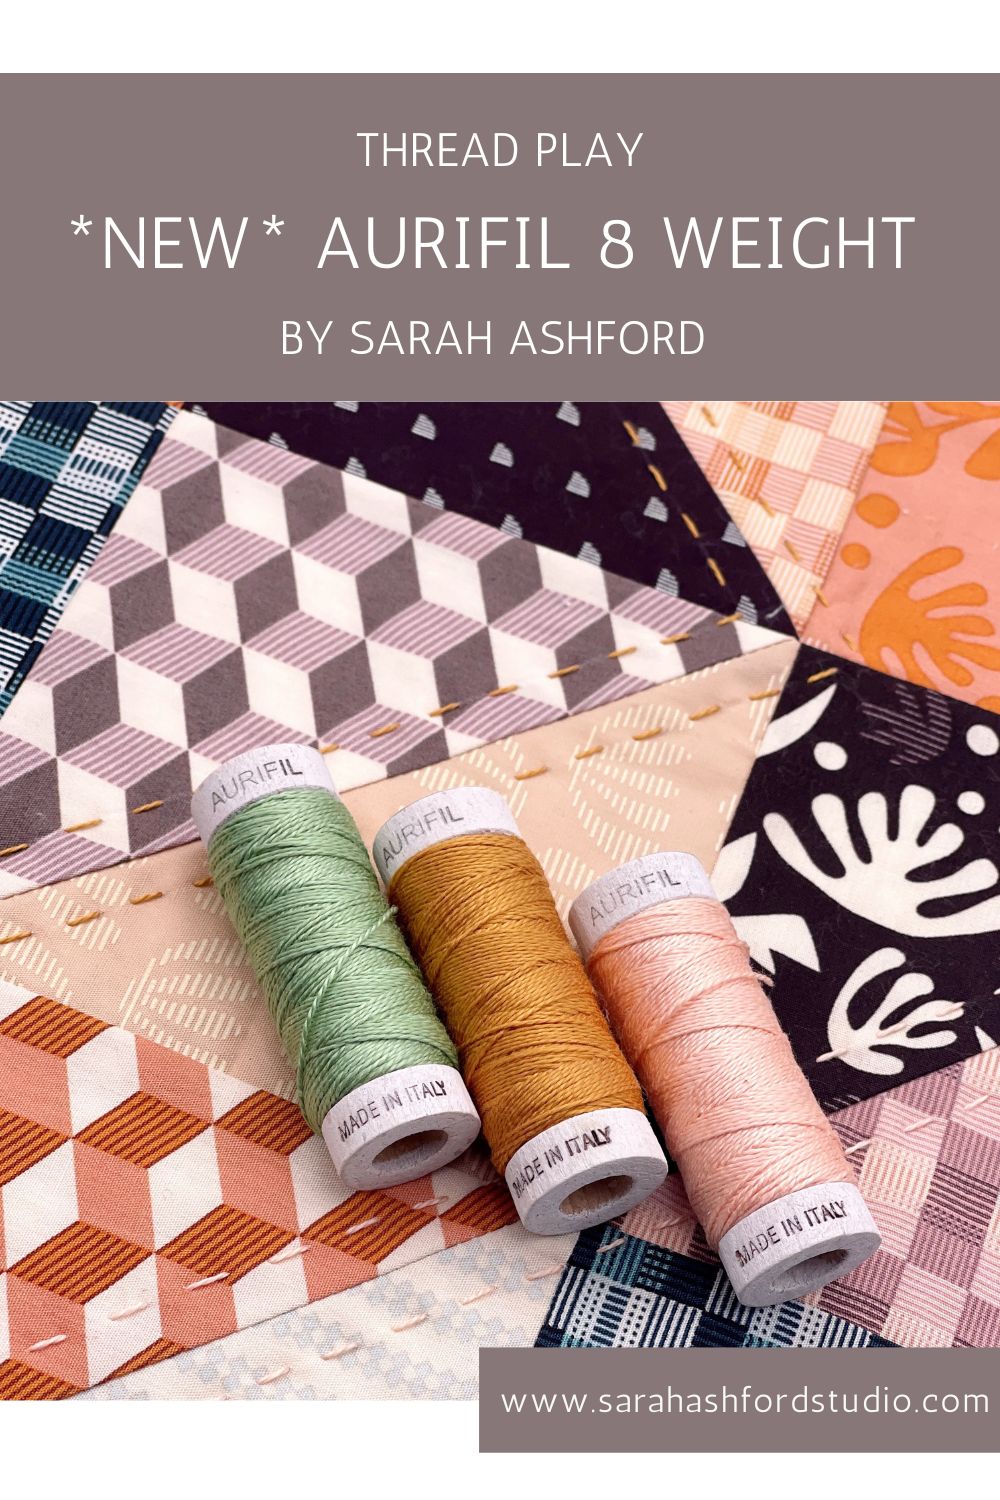 Aurifil Thread Weights For Quilting: Learn About the Different Types of Aurifil  Thread Weights and Uses - The Jolly Jabber Blog